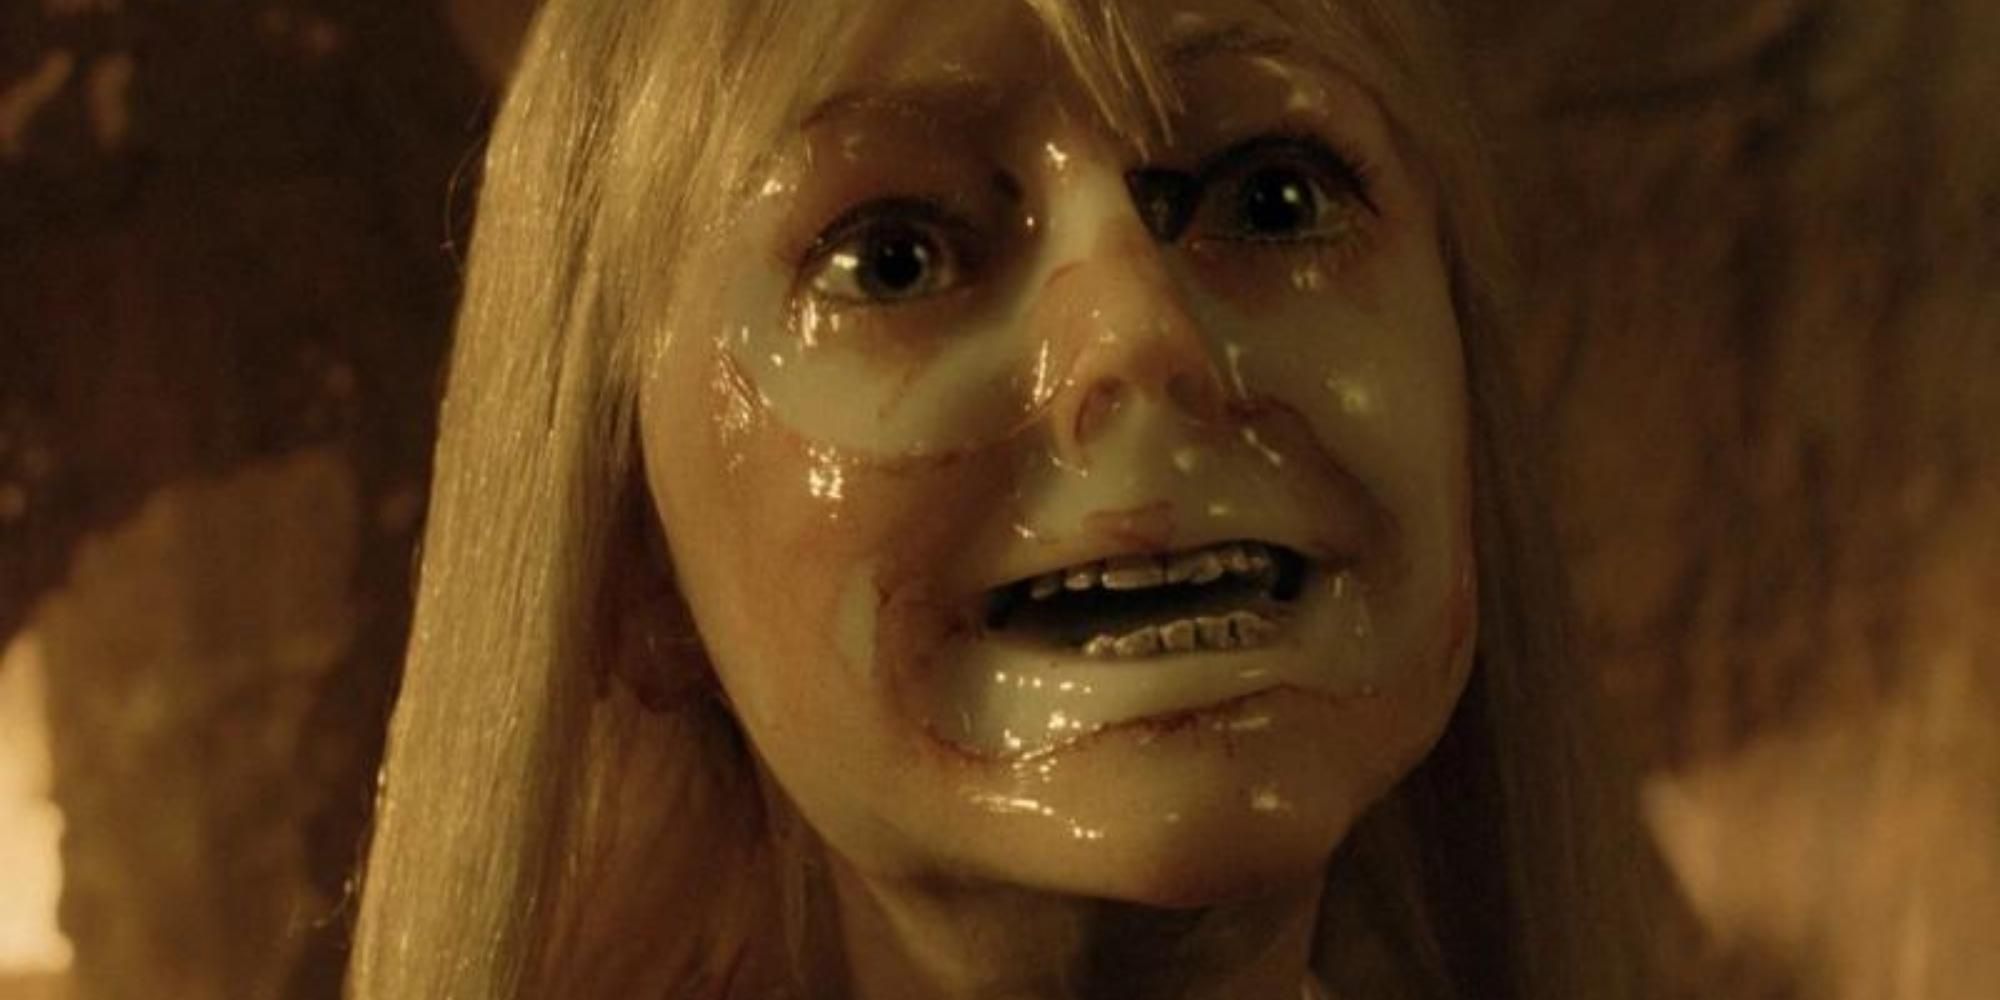 girl melting in House of Wax